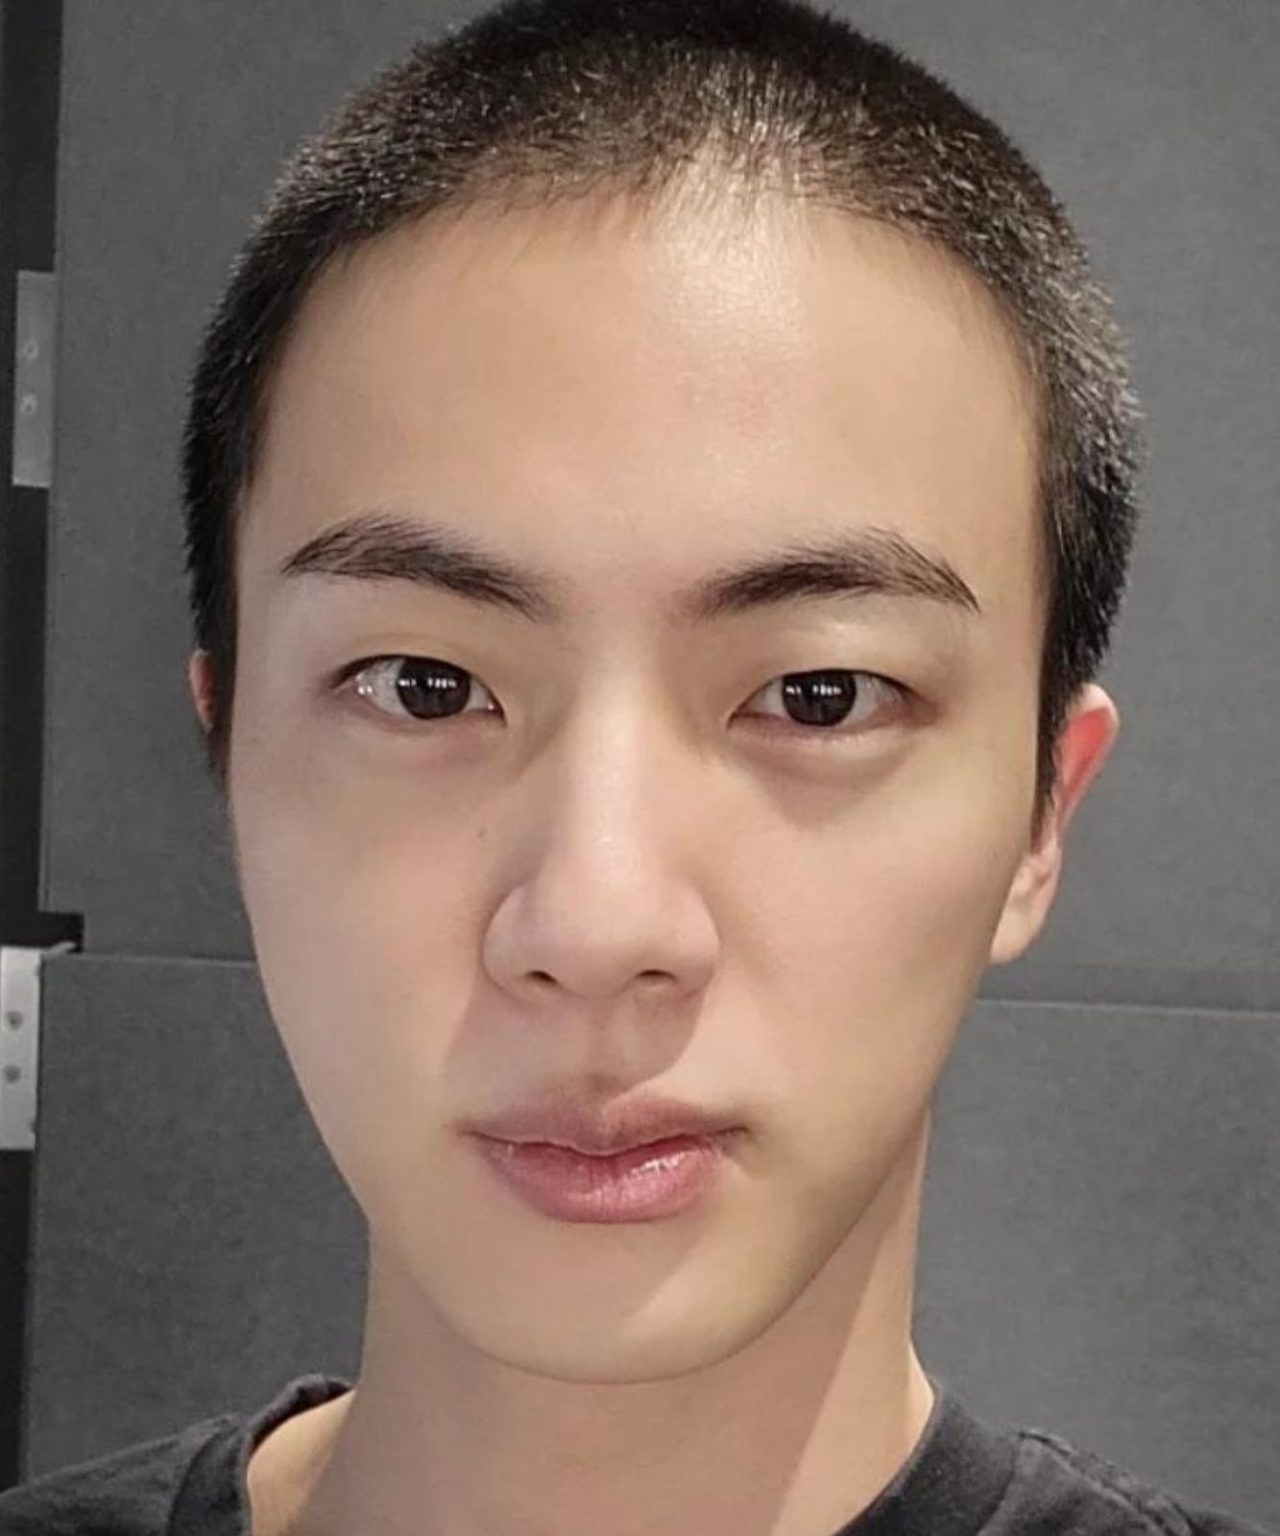 BTS Member Jin Shows Off His New Buzz Cut Ahead of Military Service